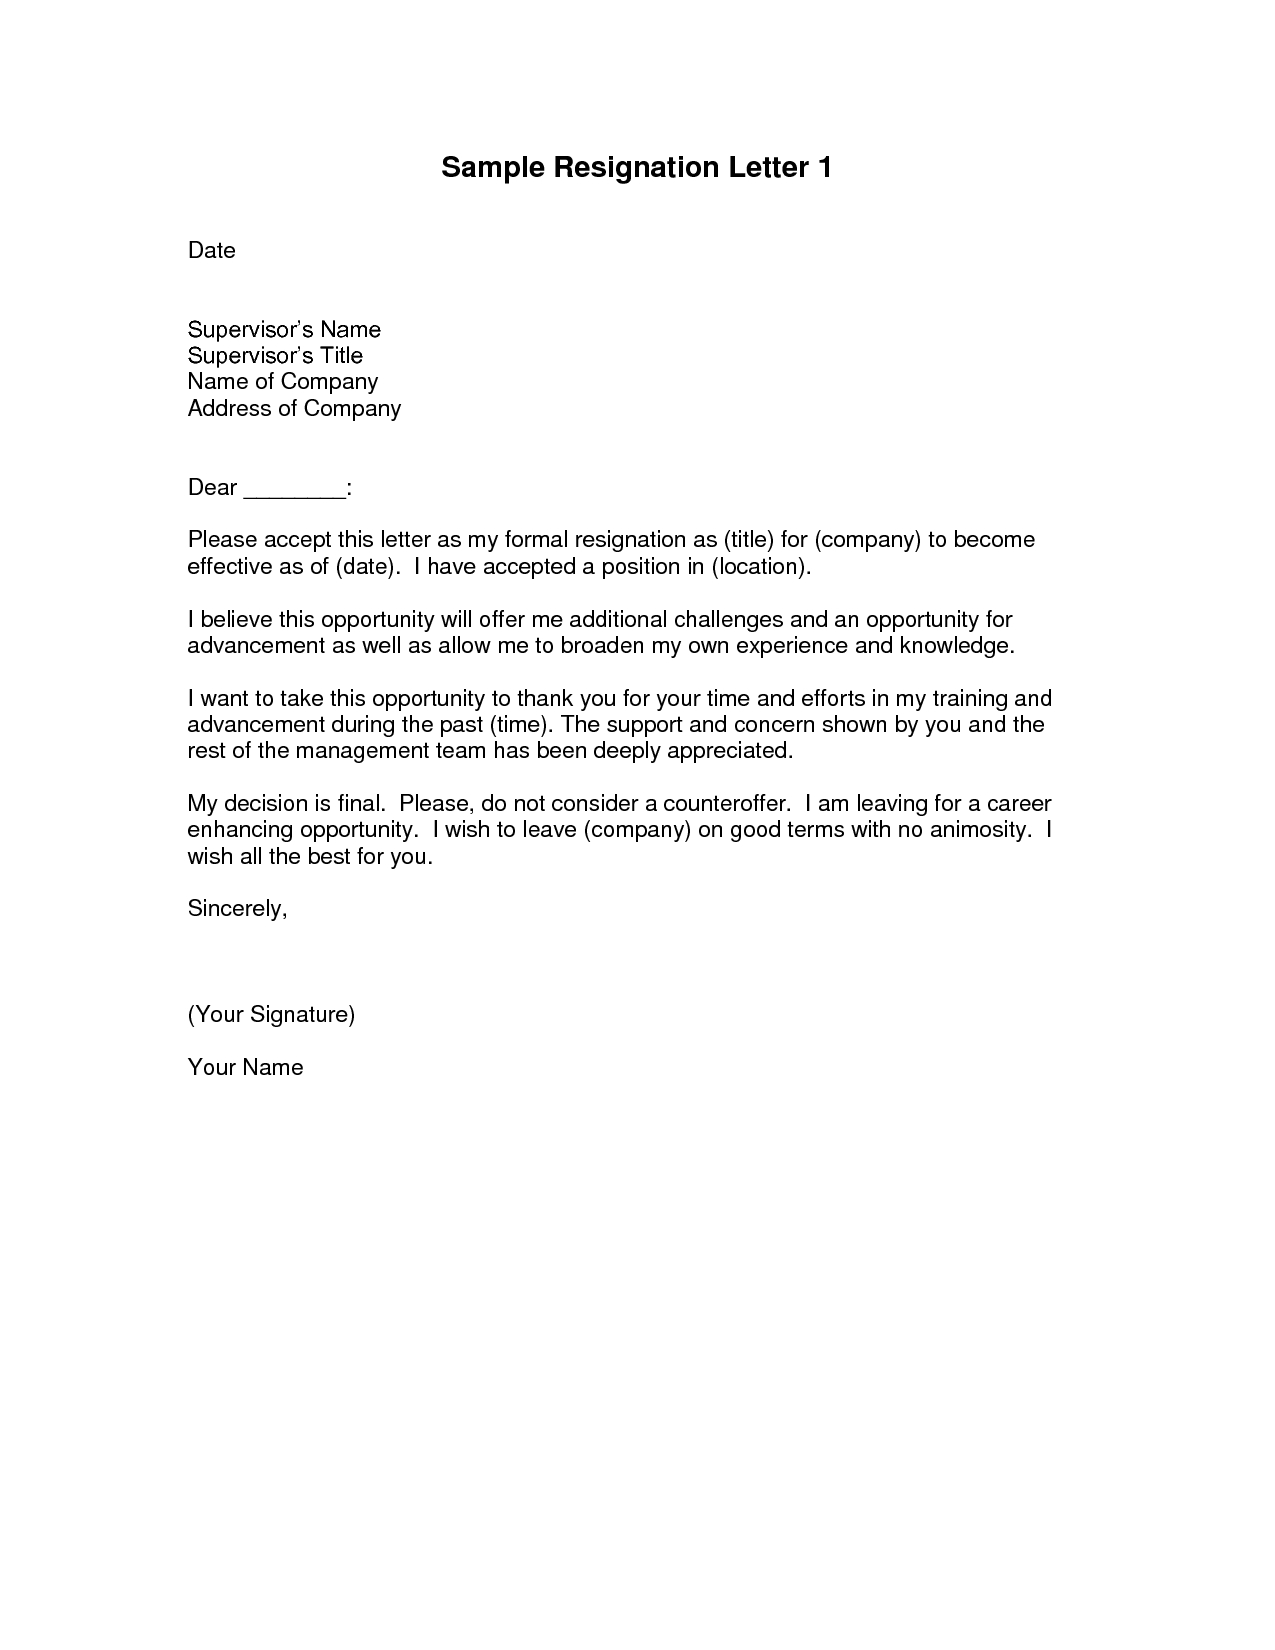 Letter Of Resignation Template  010 Letter Of Resignation Template Sample B7mv8uod Magnificent Ideas